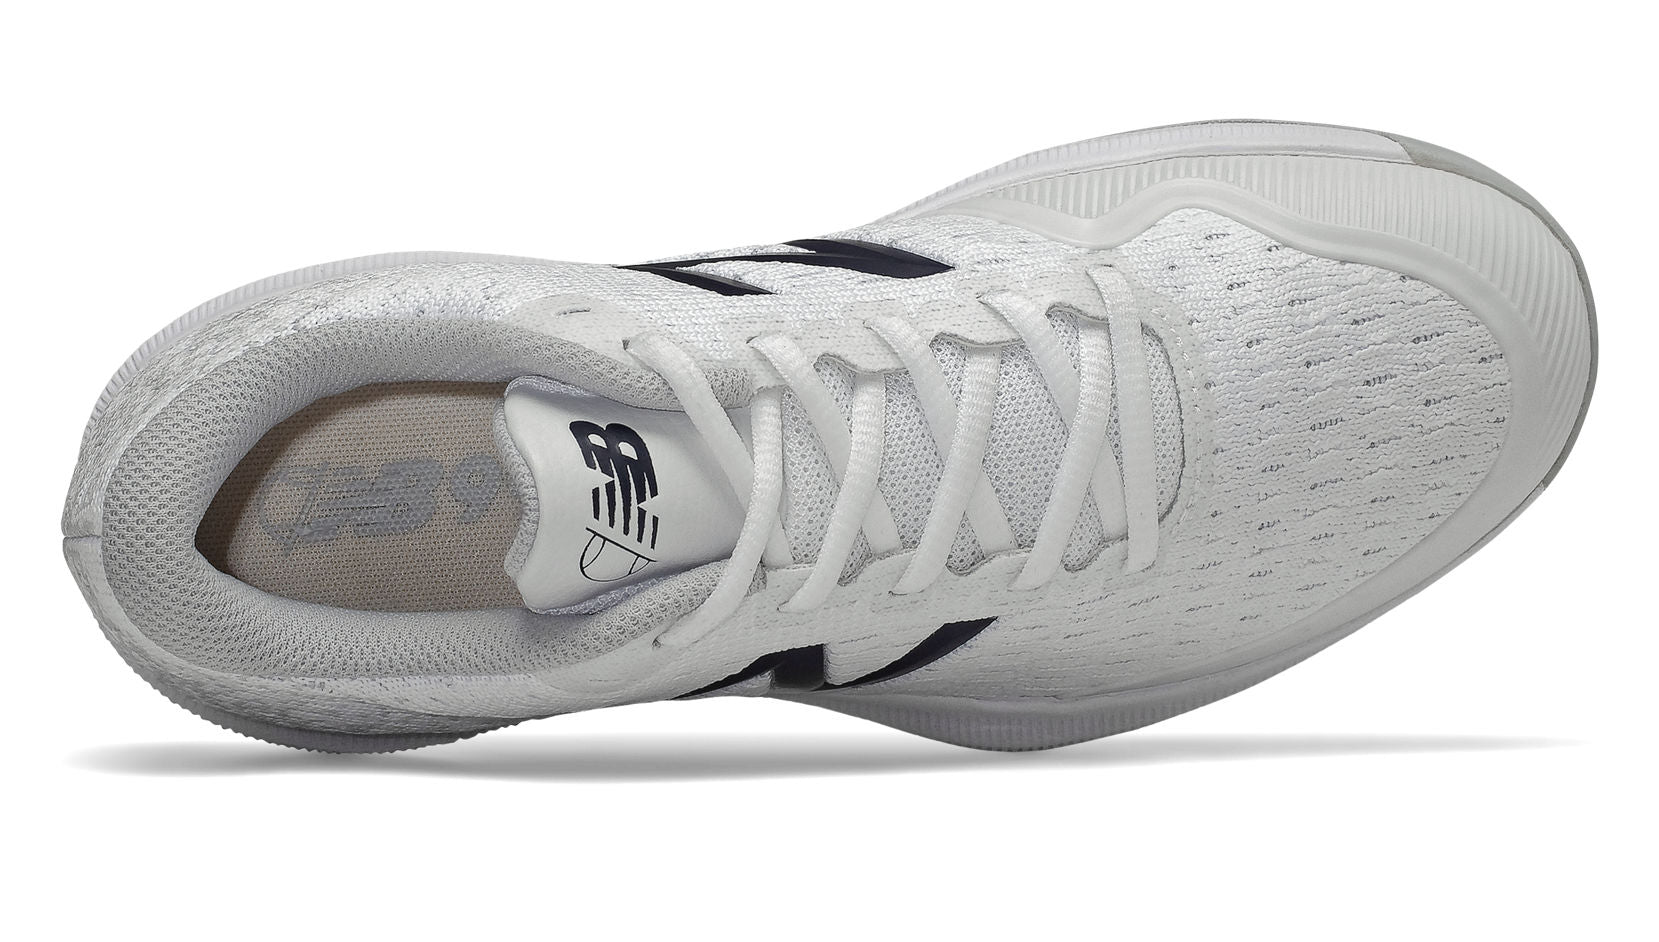 New Balance FuelCell 996V4 B (Women's) - White/Grey